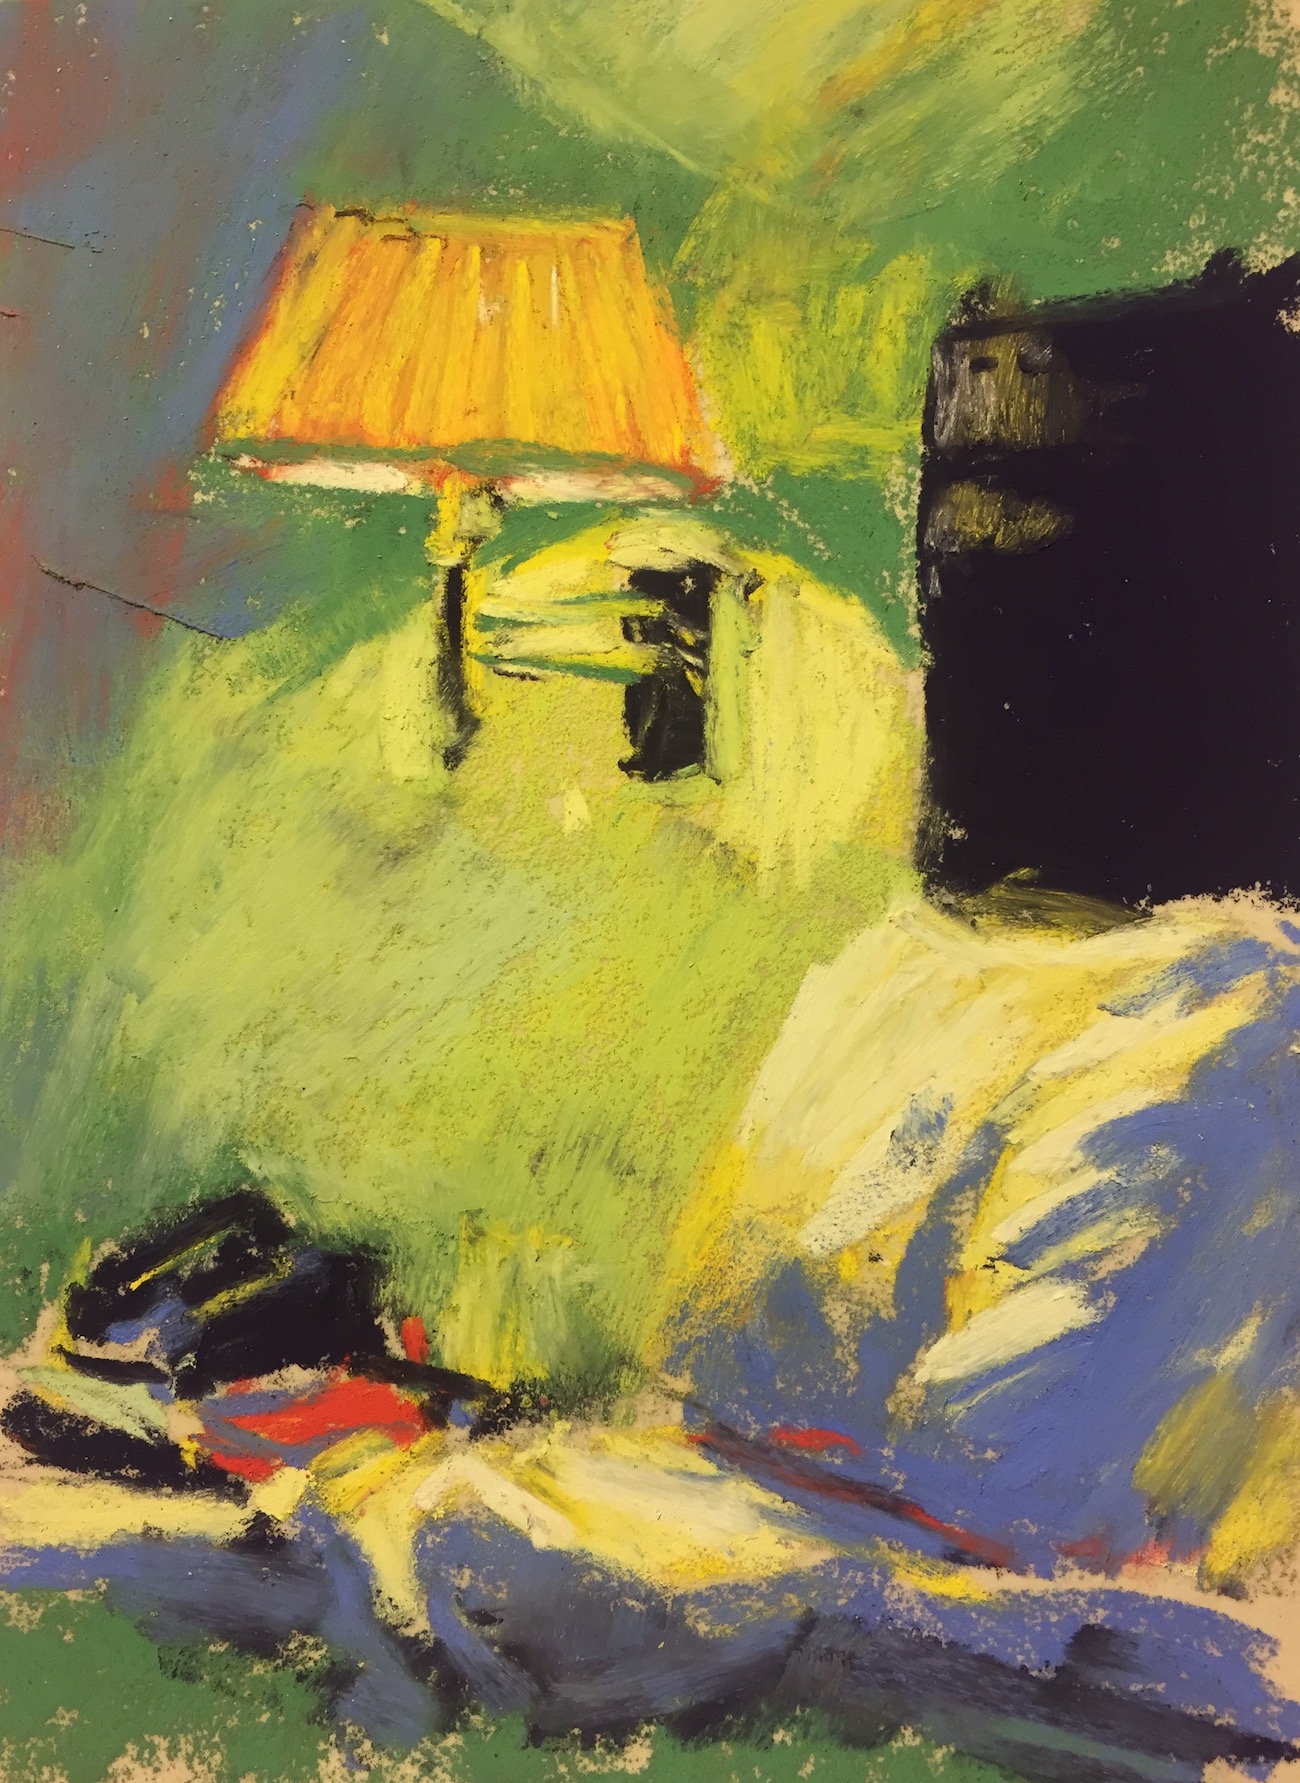 small box of pastels: Gail Sibley, "Bedside at Days Inn," Unison pastels on UART 400, 6 x 4 1/2 in. Available